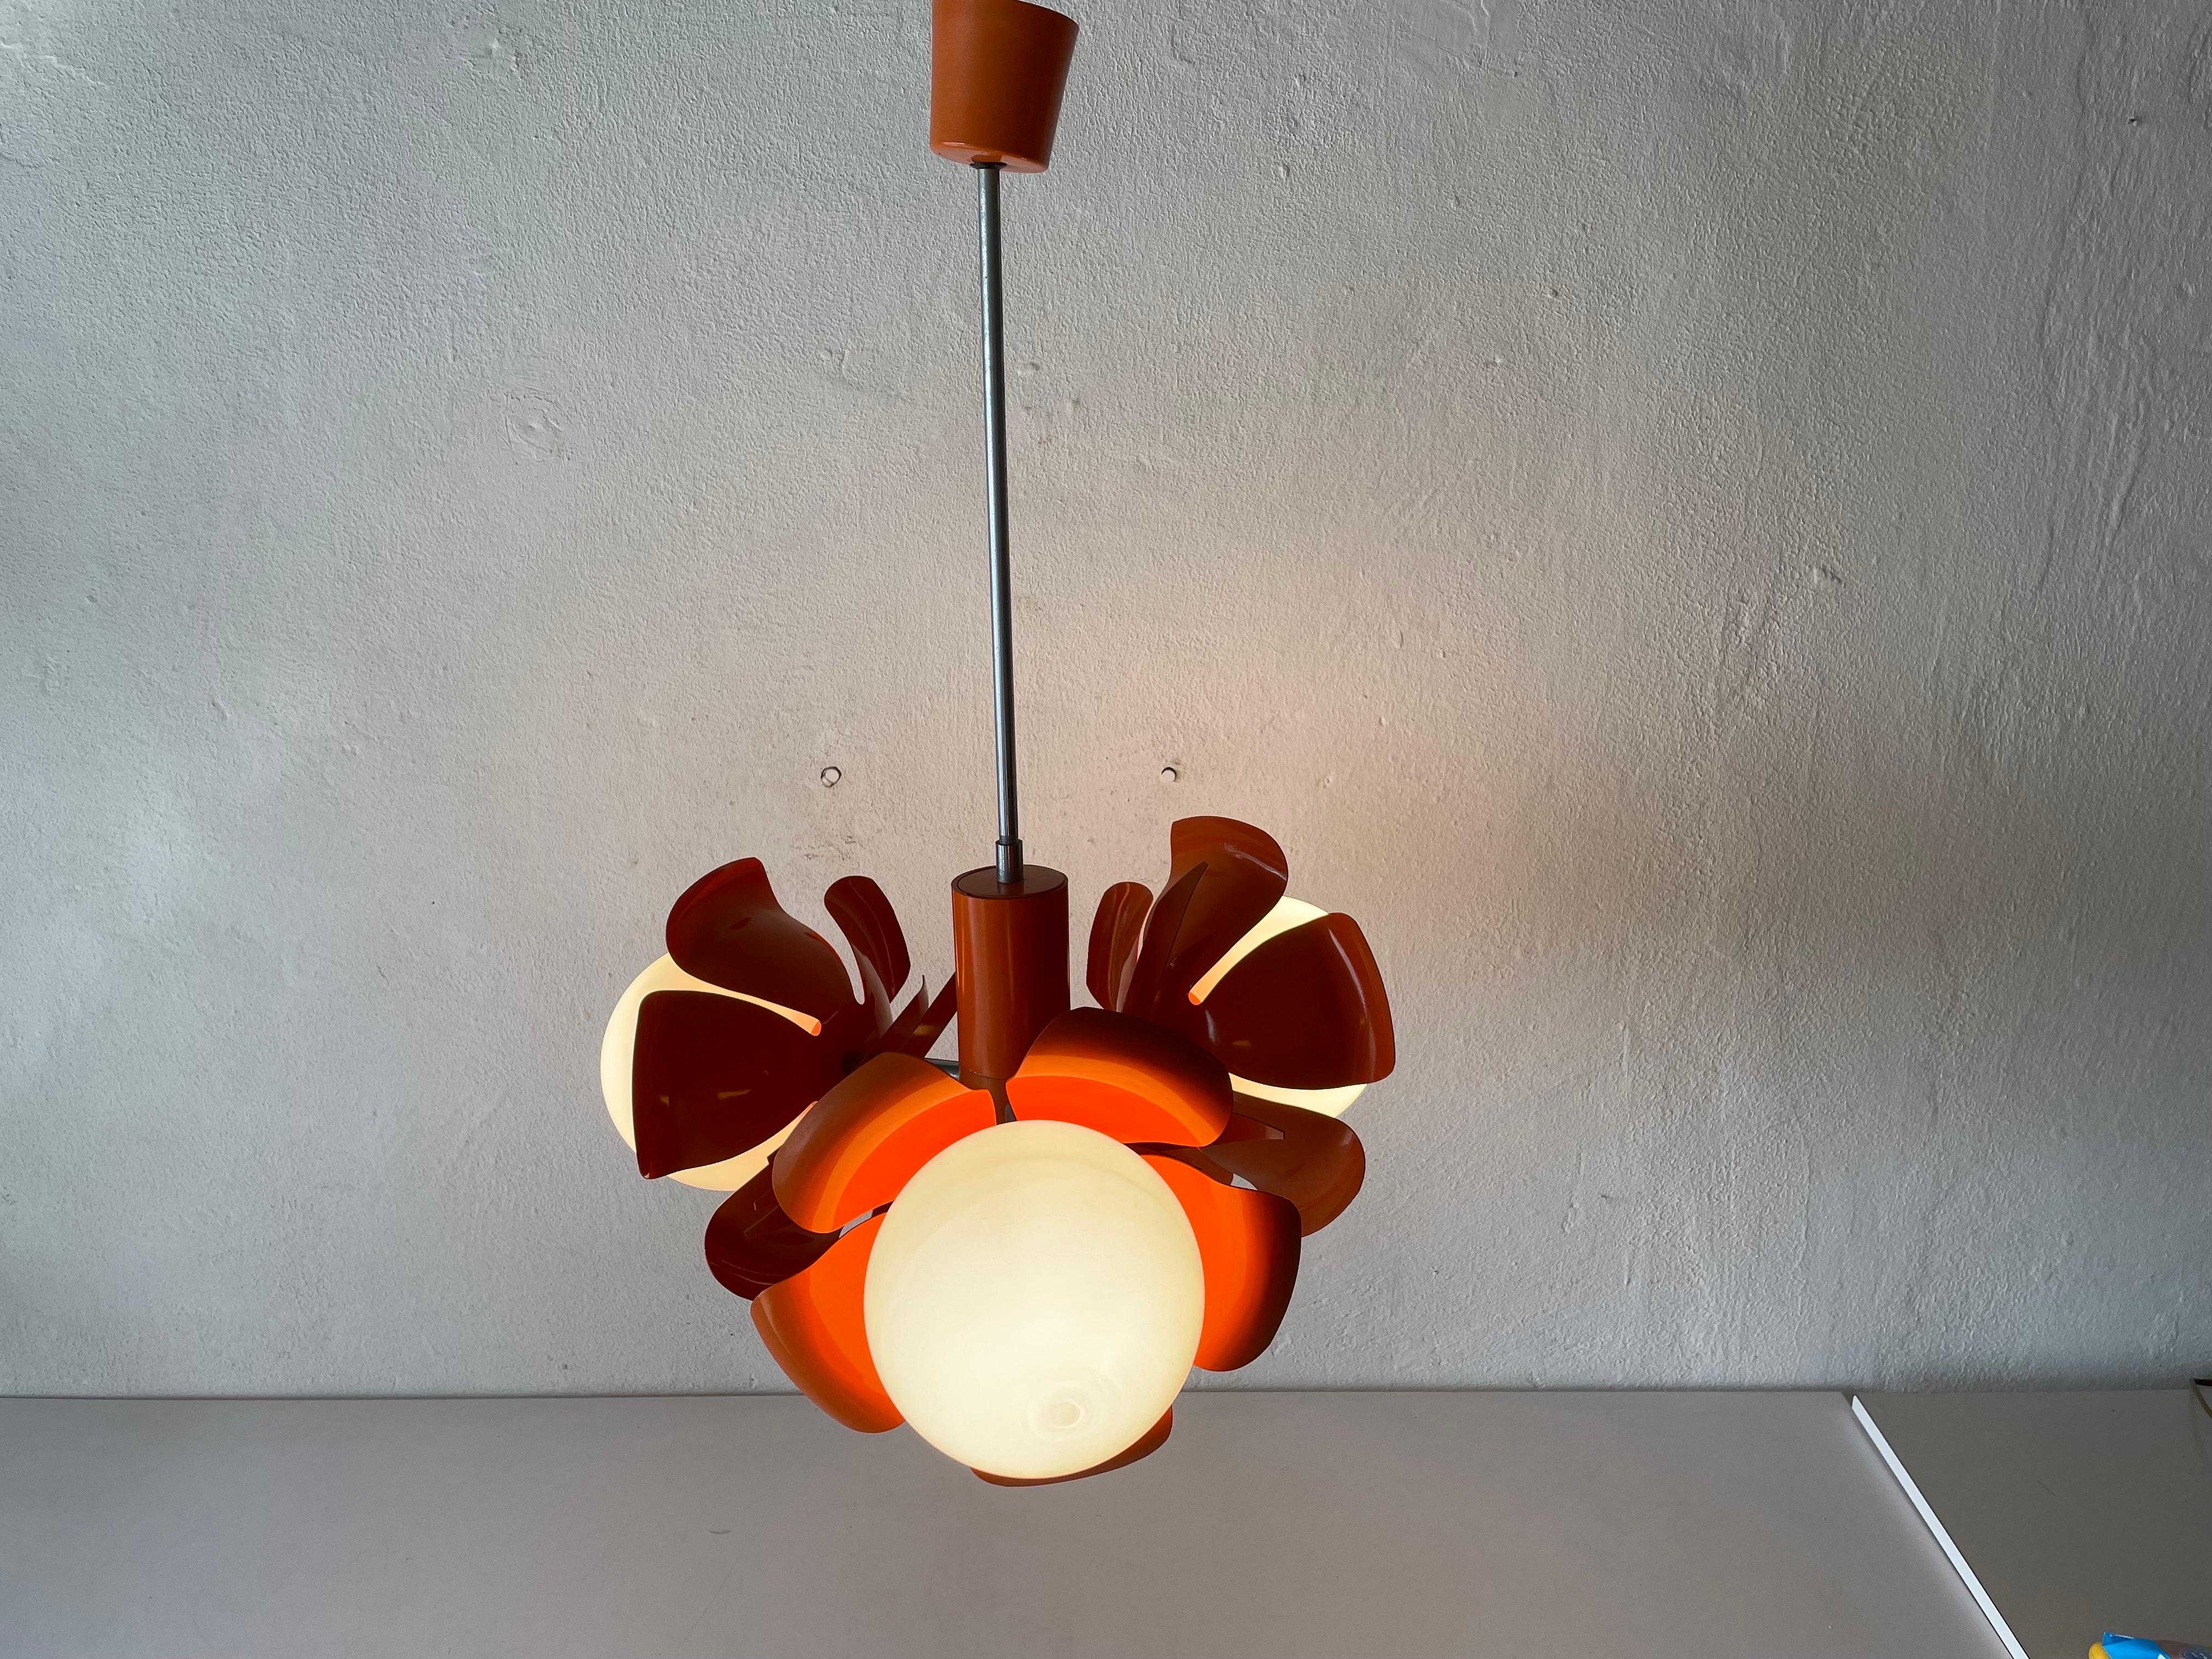 Orange Flower Design Space Age Ceiling Lamp, 1970s, Italy For Sale 4